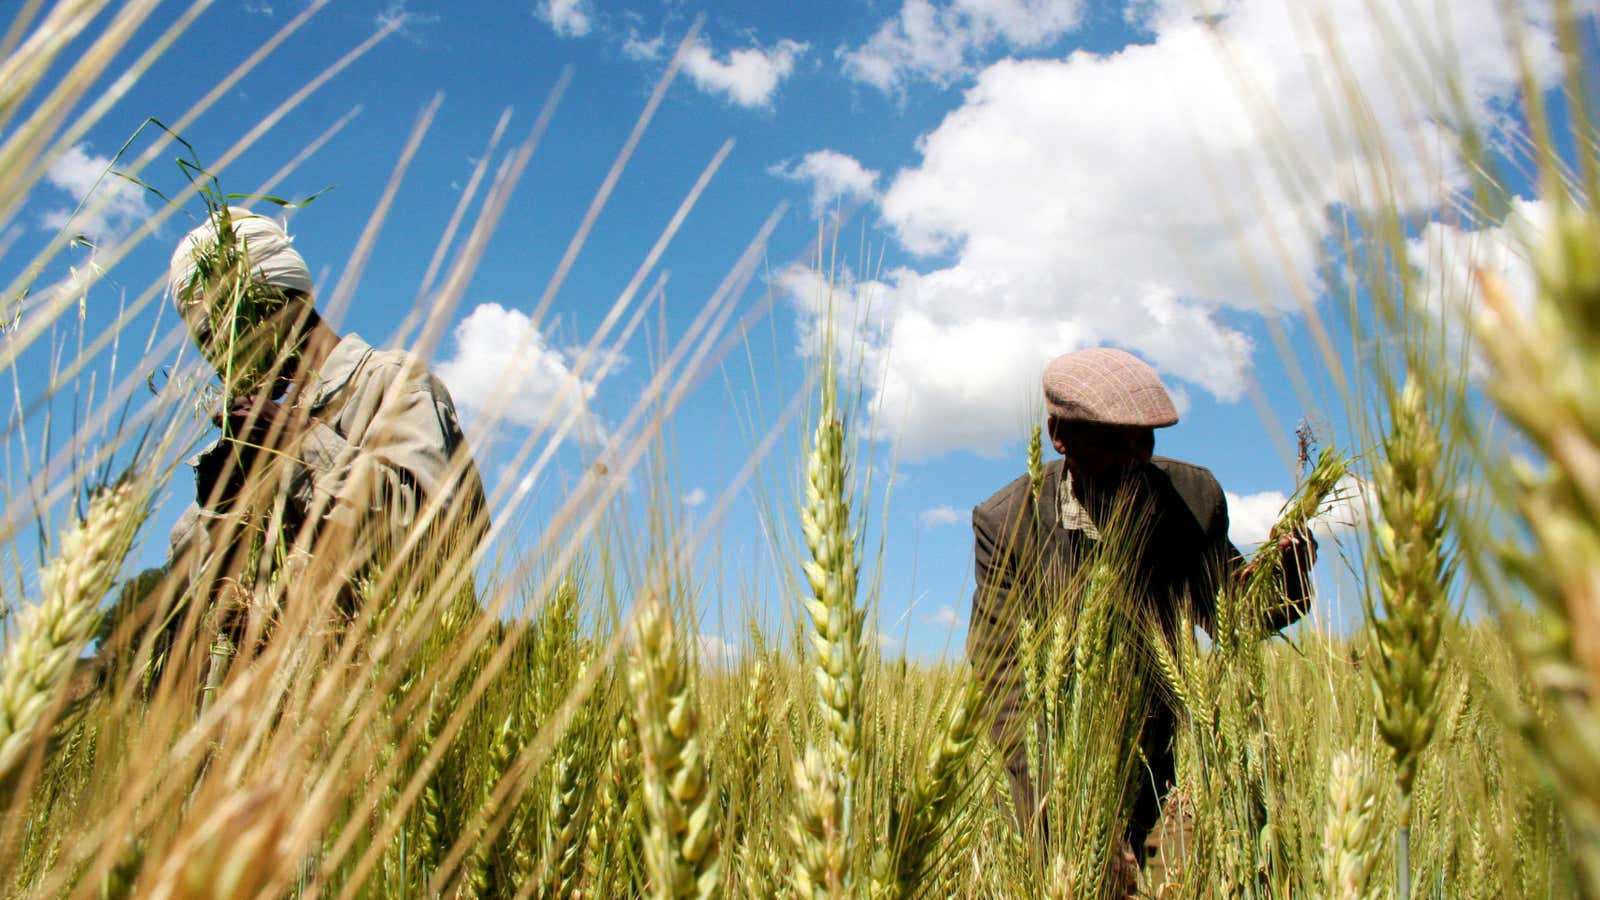 Ethiopian farmers collect wheat in Abay, north of Ethiopia’s capital Addis Ababa